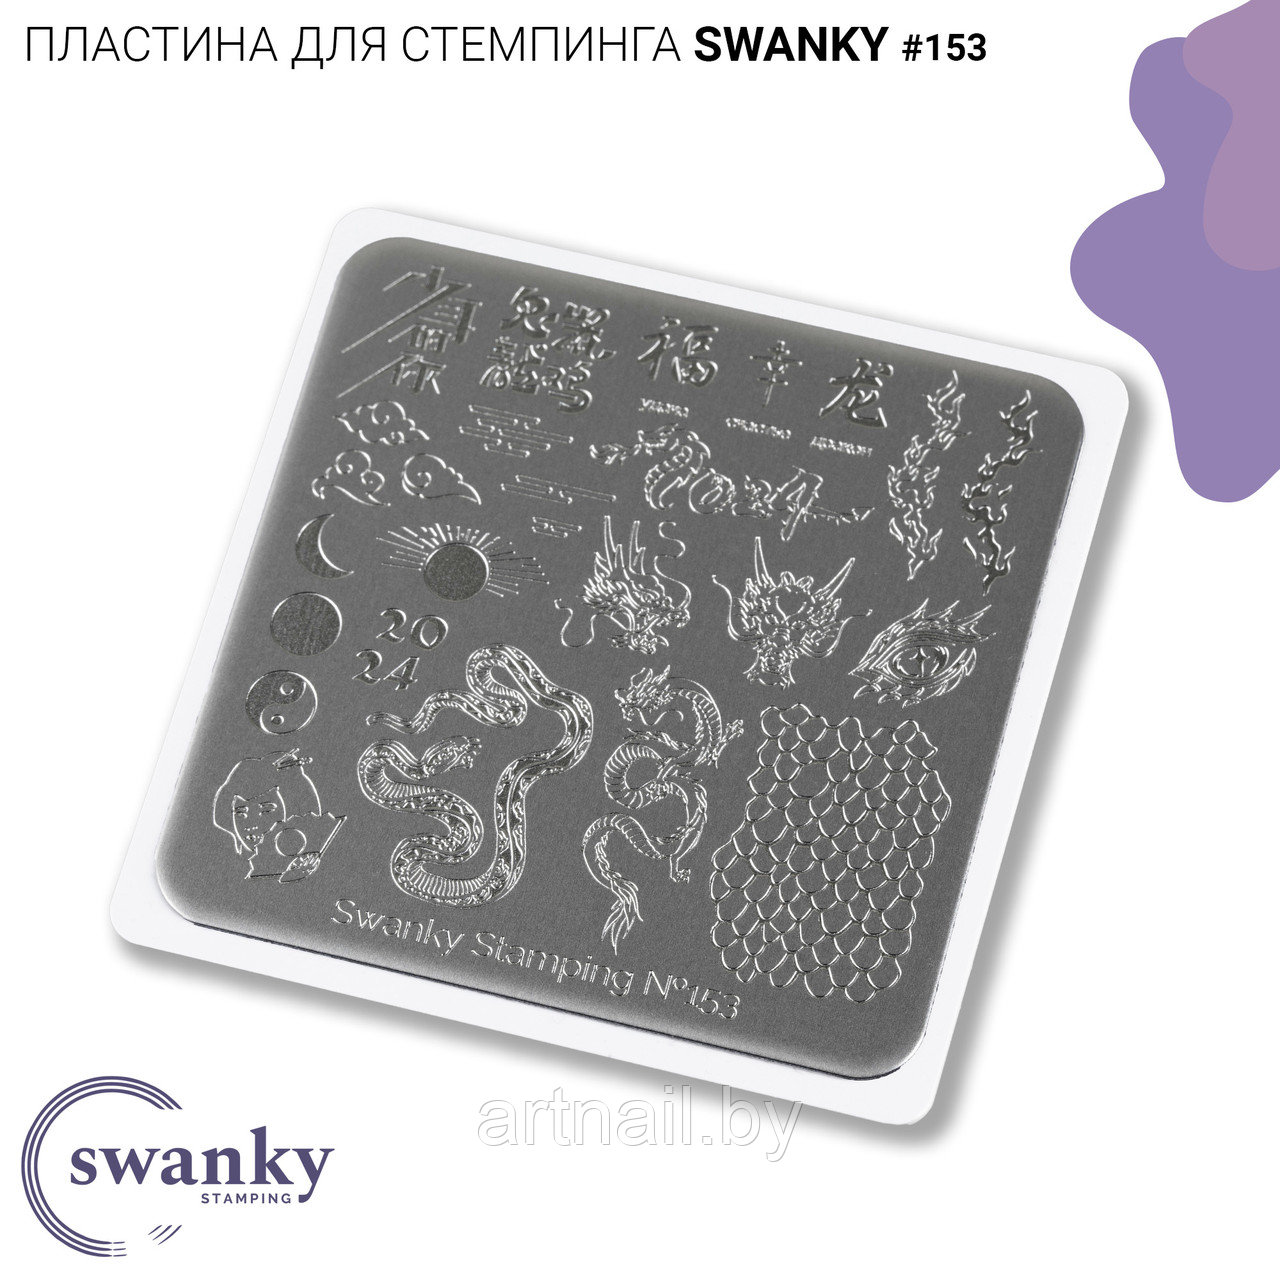 Swanky Stamping, Пластина №153